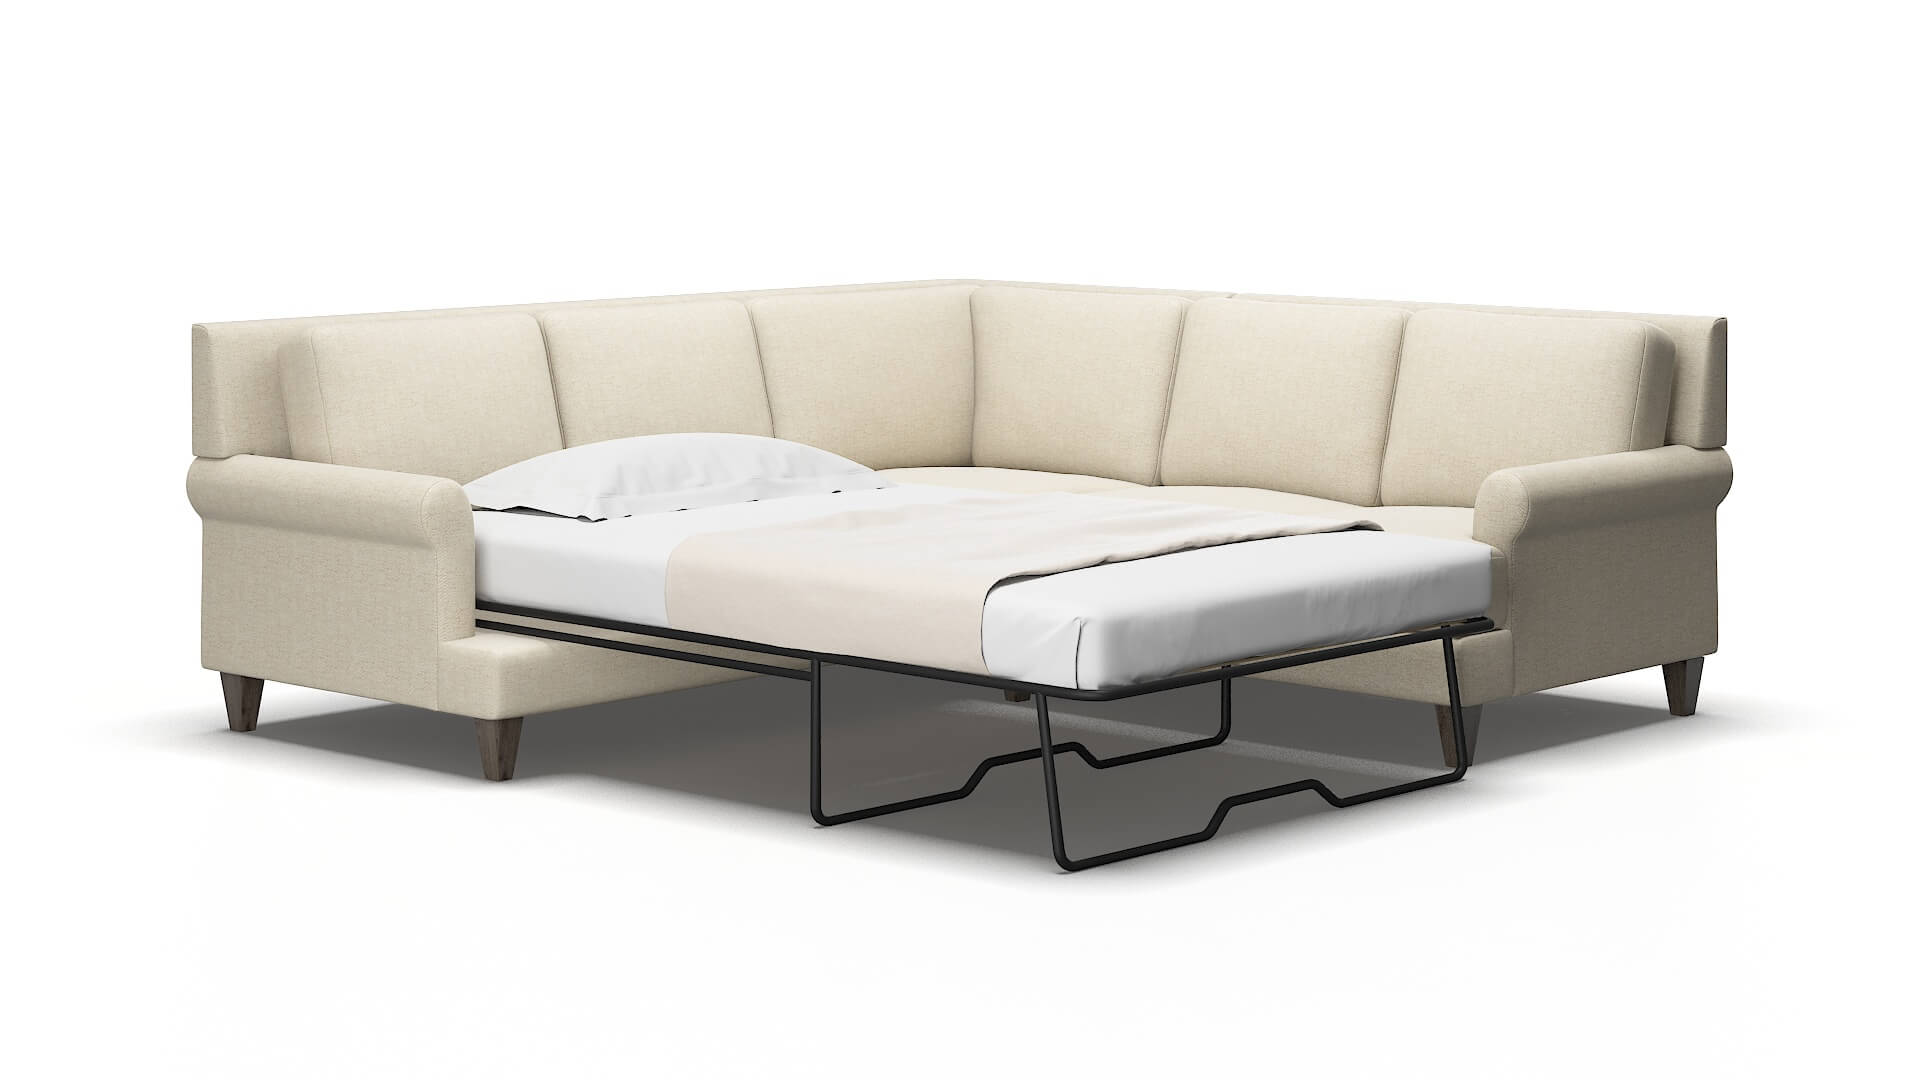 Stockholm Catalina Wheat Sectional Sleeper 2